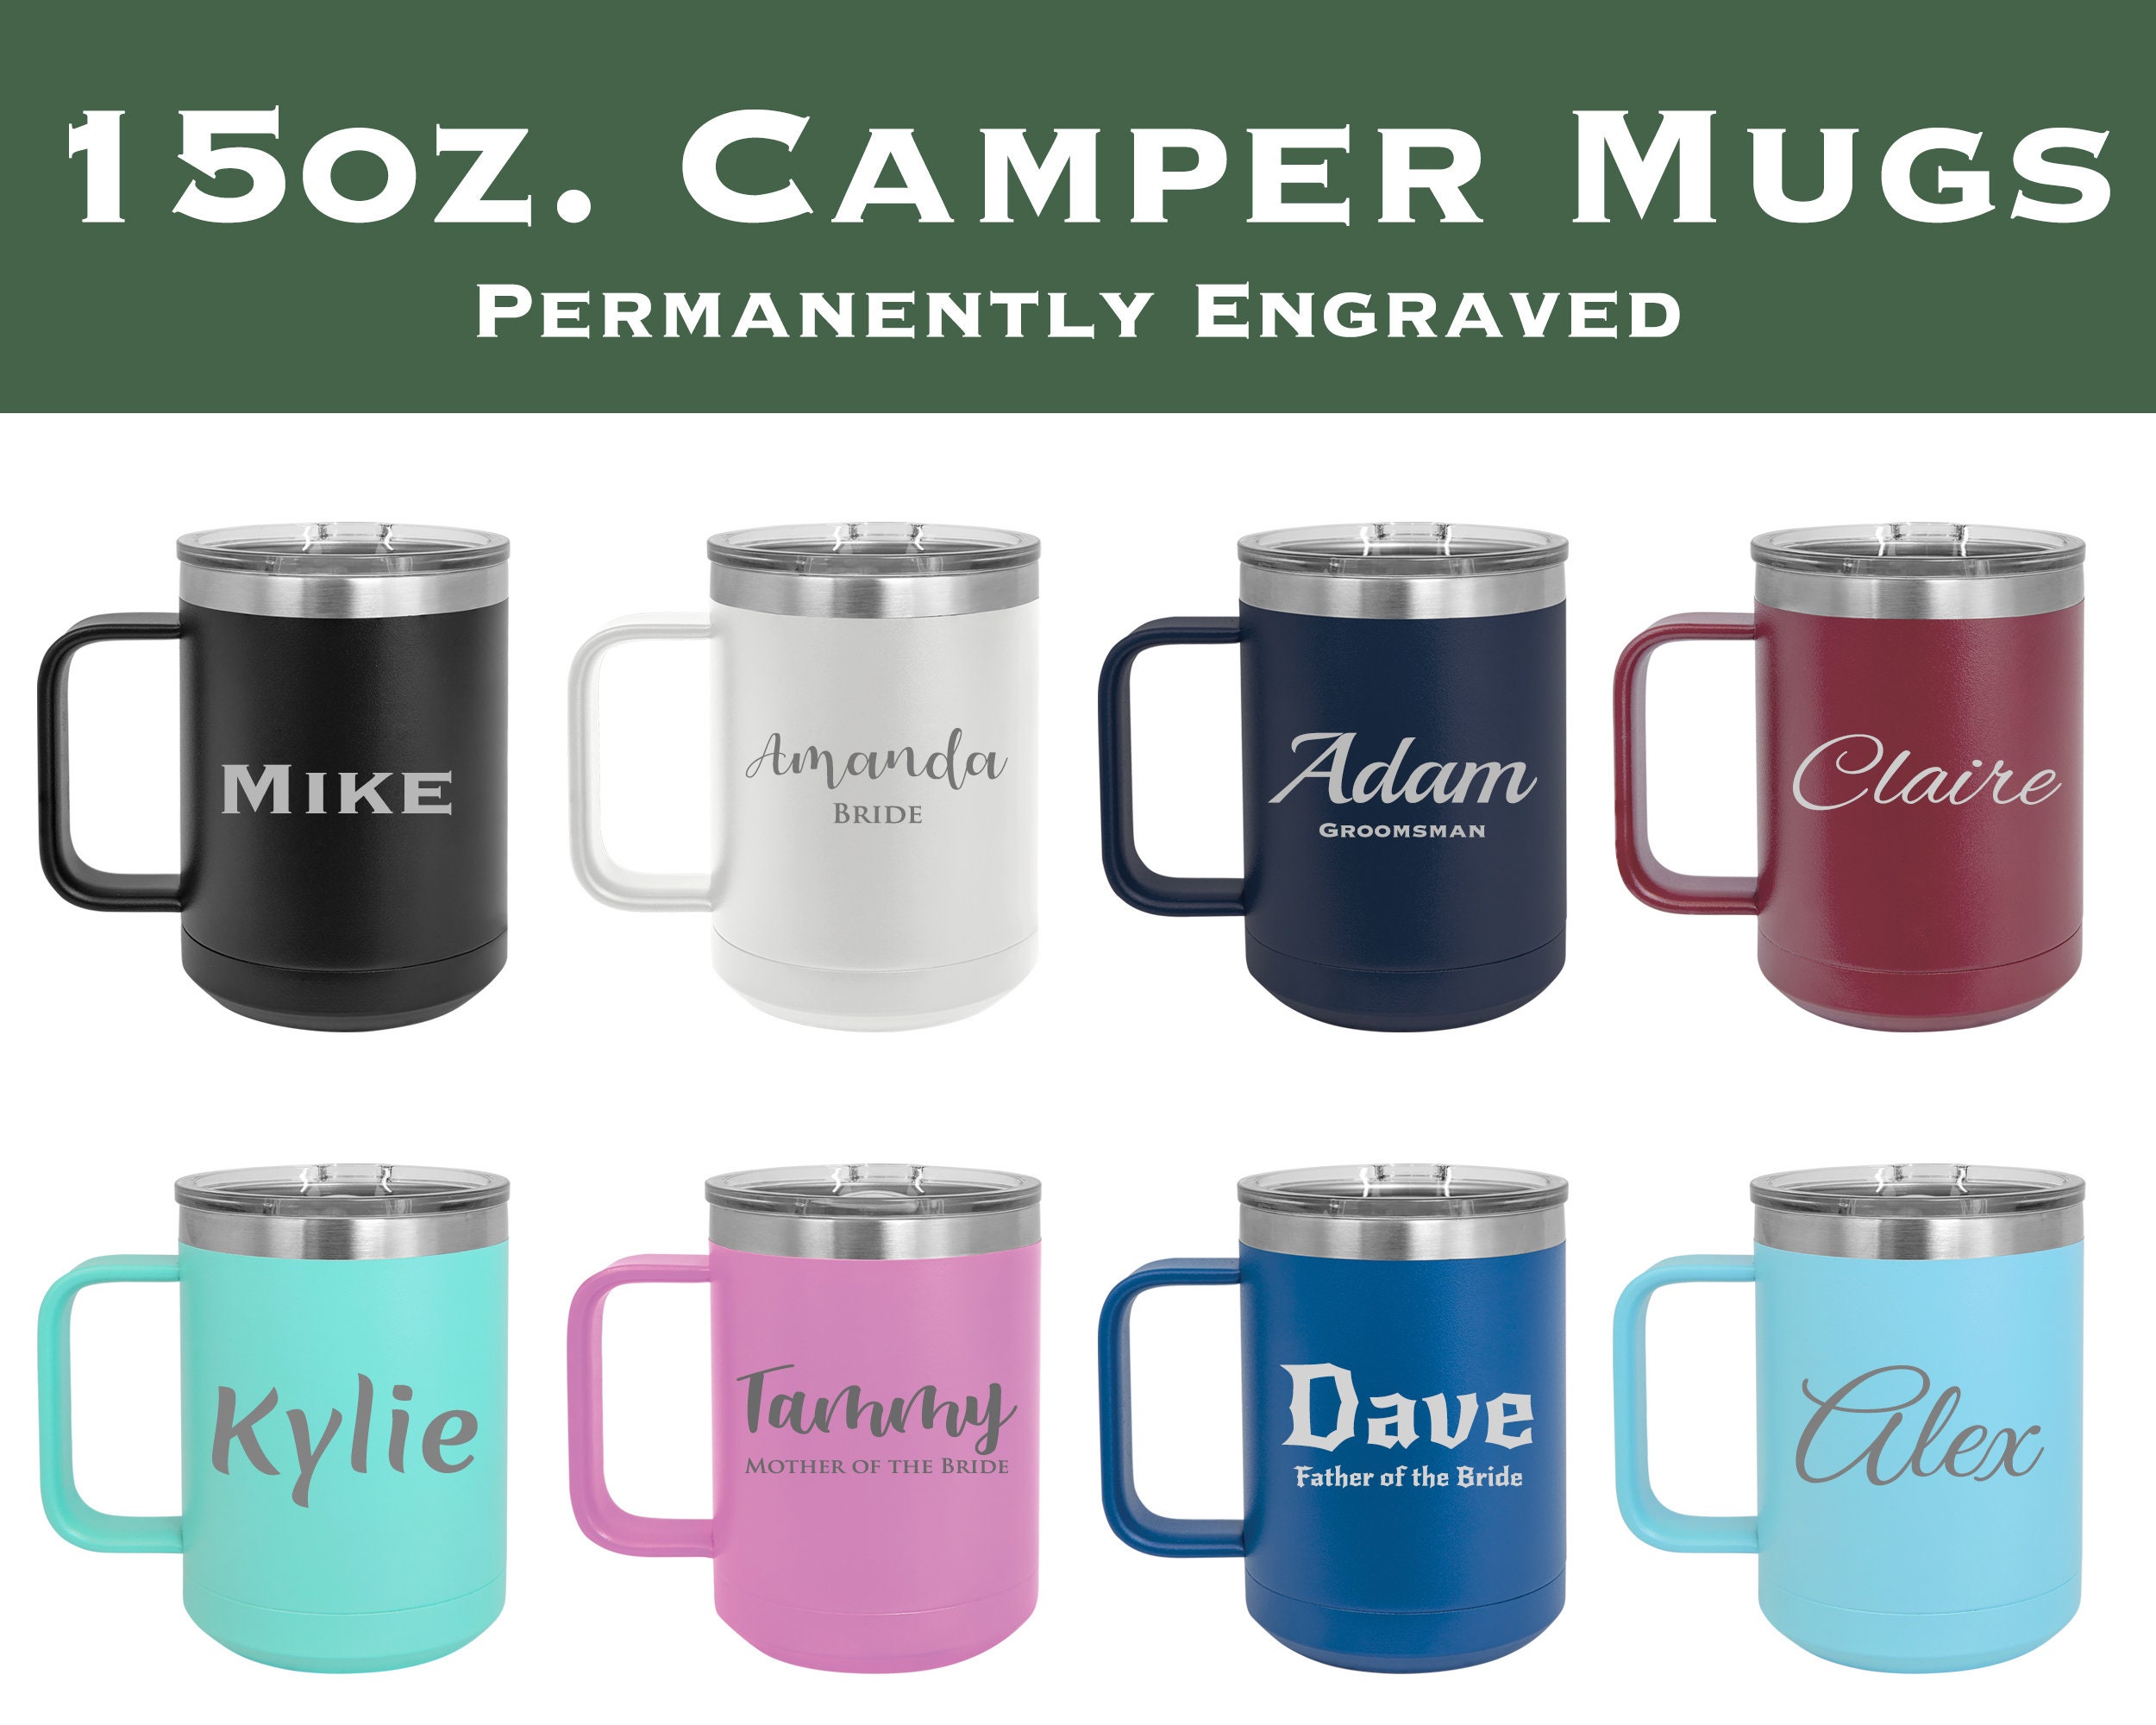 Personalized Weekend Forecast Camping Drinking White Stainless Steel Travel Camp  Mug w lid - Personalize It For You! - Personalize It For You!